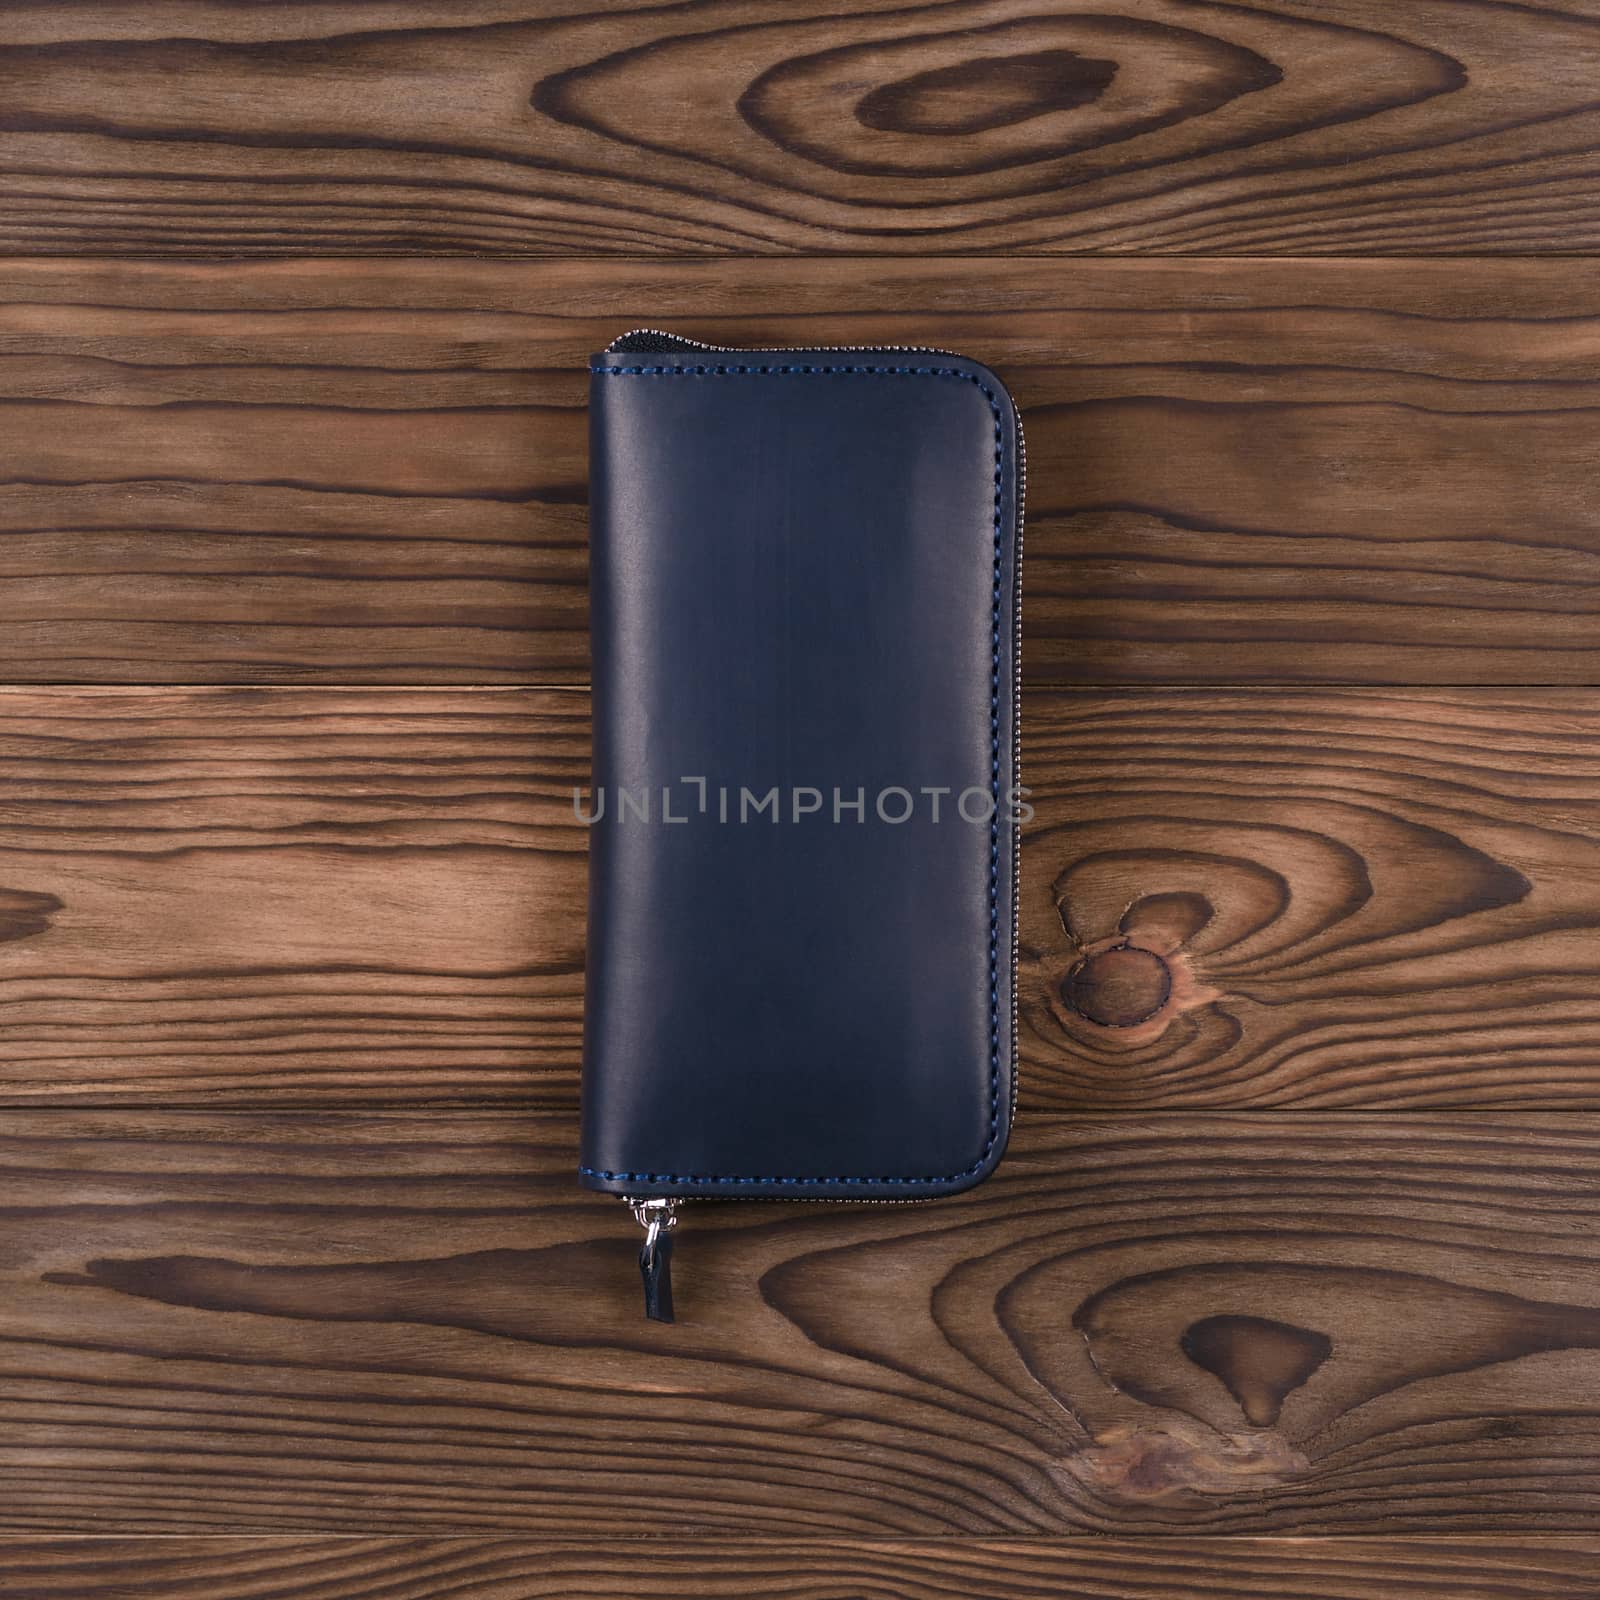 Dark blue color handmade leather porte-monnaie on wooden textured background.  Up to down view. Stock photo of luxury accessories.